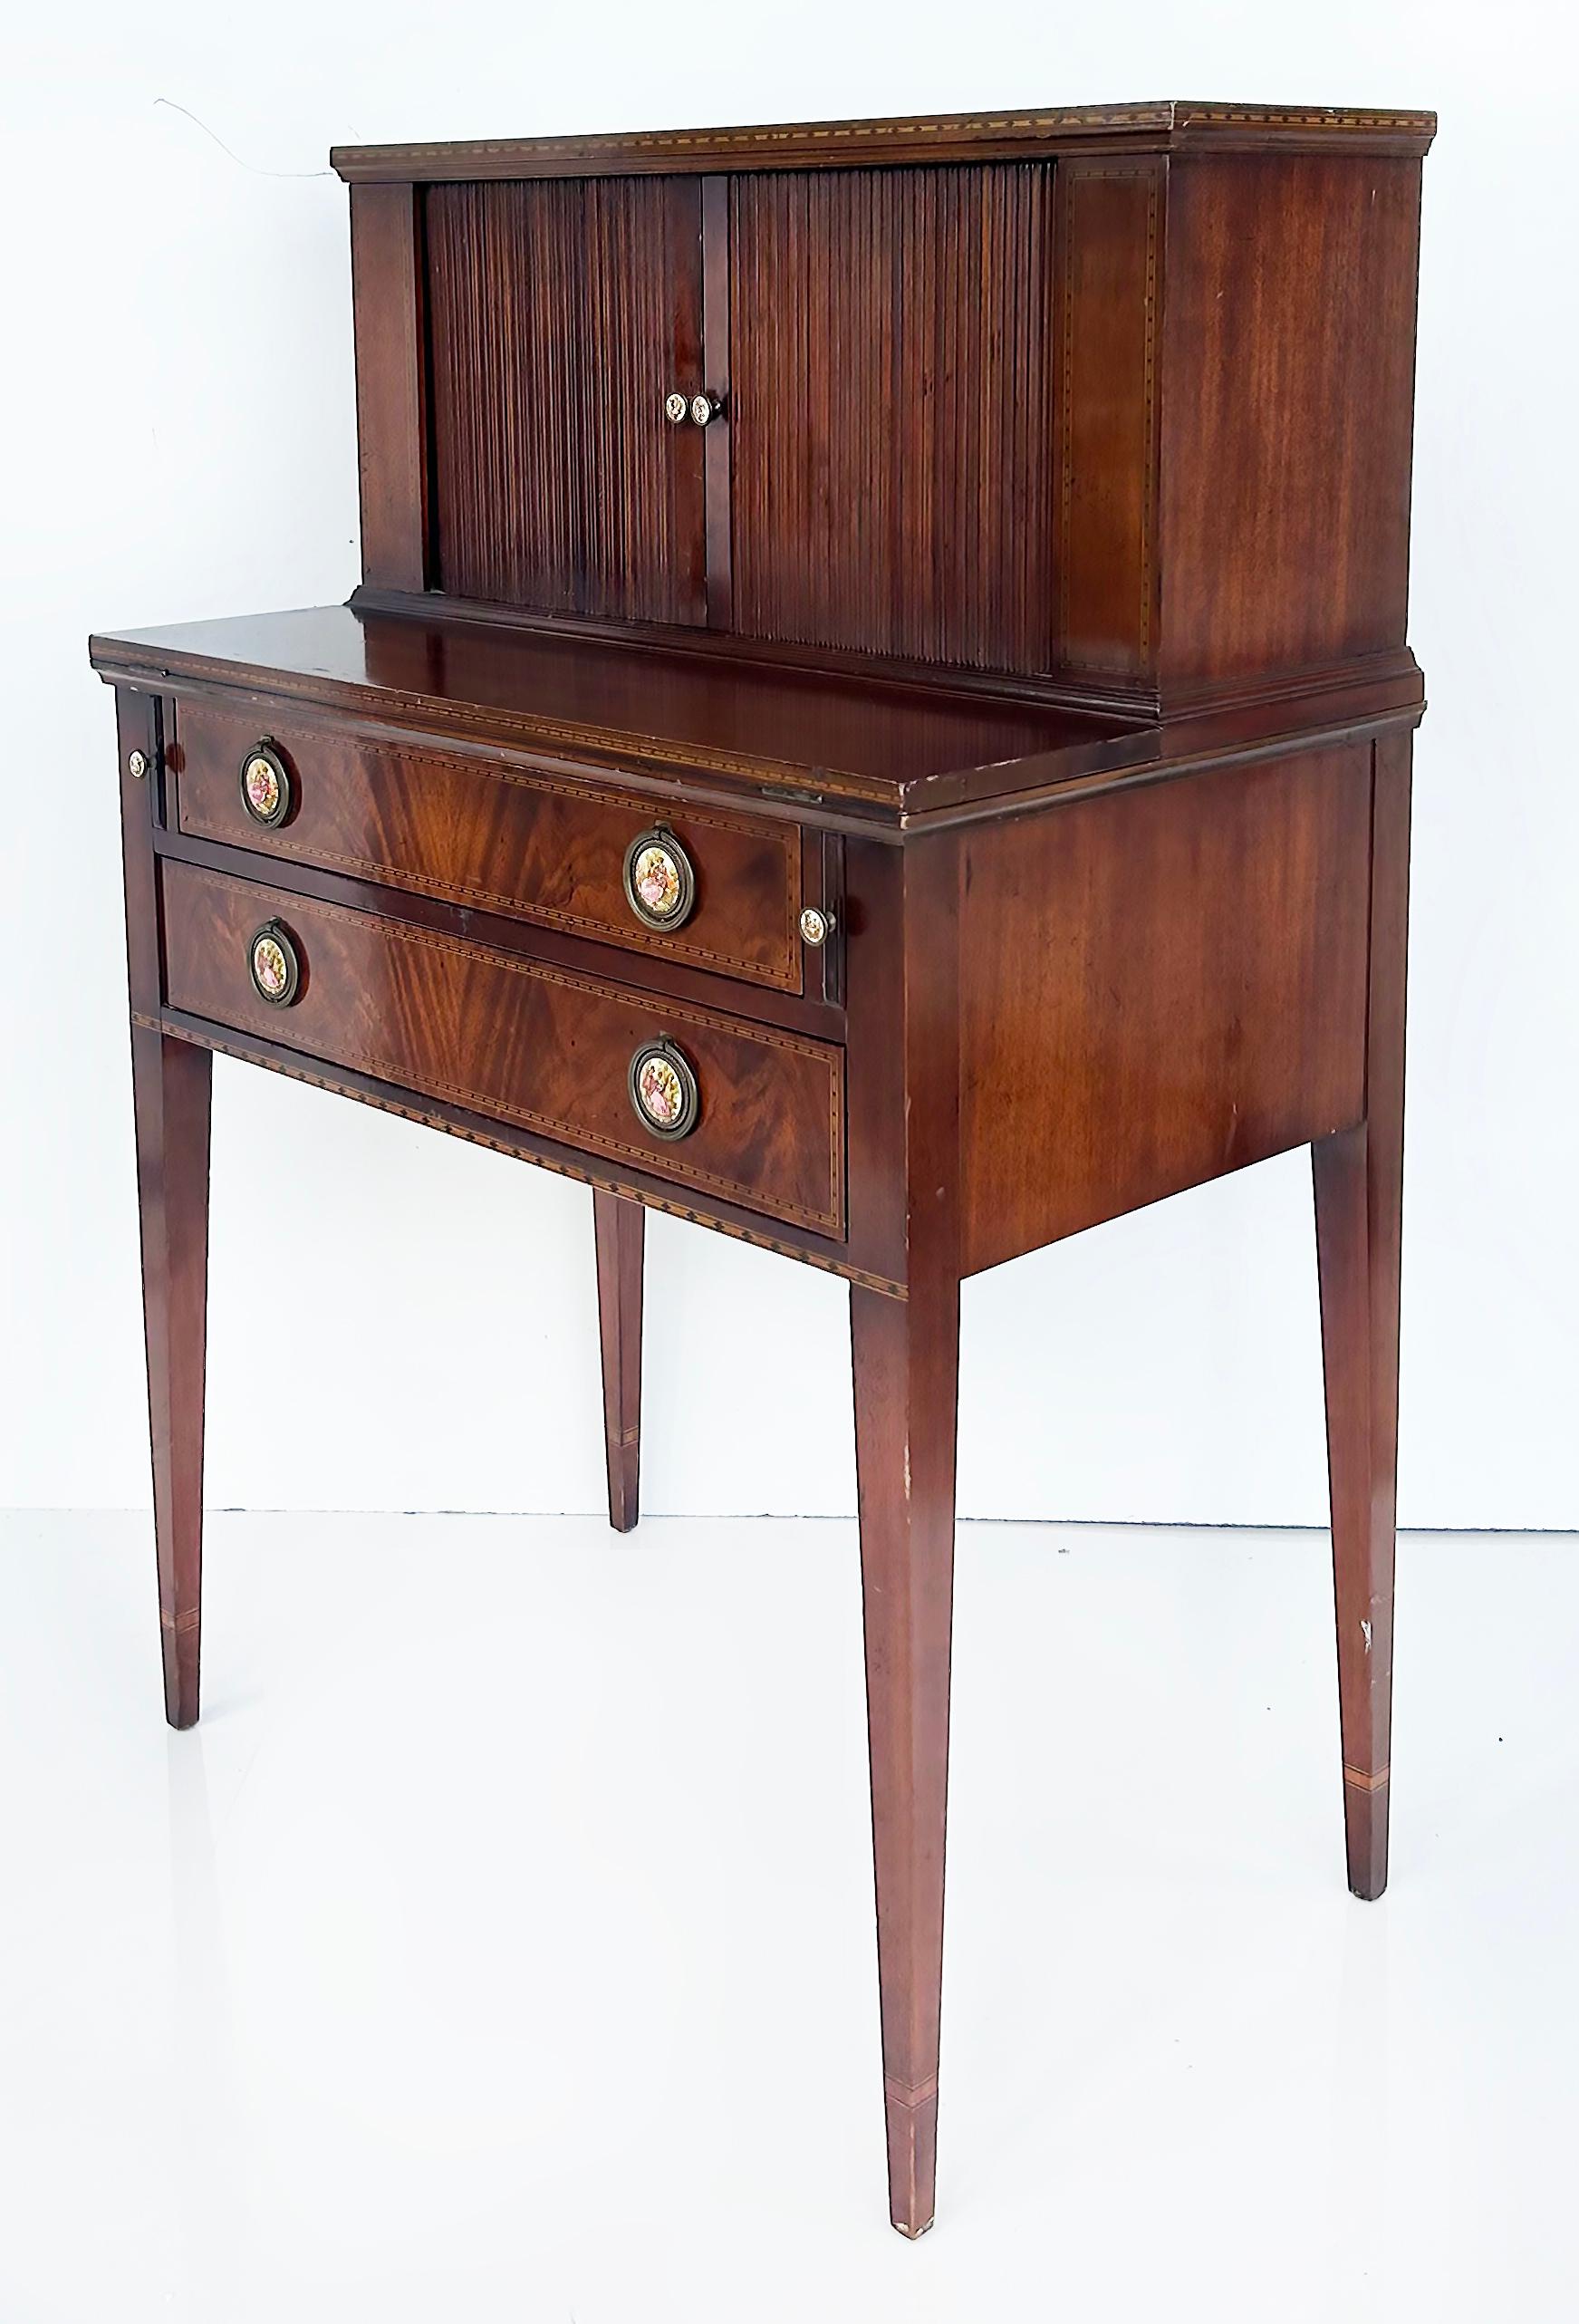 1960s Lady's Writing Desk Secretaire, Tambour Doors, Marquetry Banded Drawers

Offered for sale is a diminutive lady's secretaire writing desk with flame mahogany veneers, banded marquetry drawers, and tambour doors that open to reveal cubby holes,